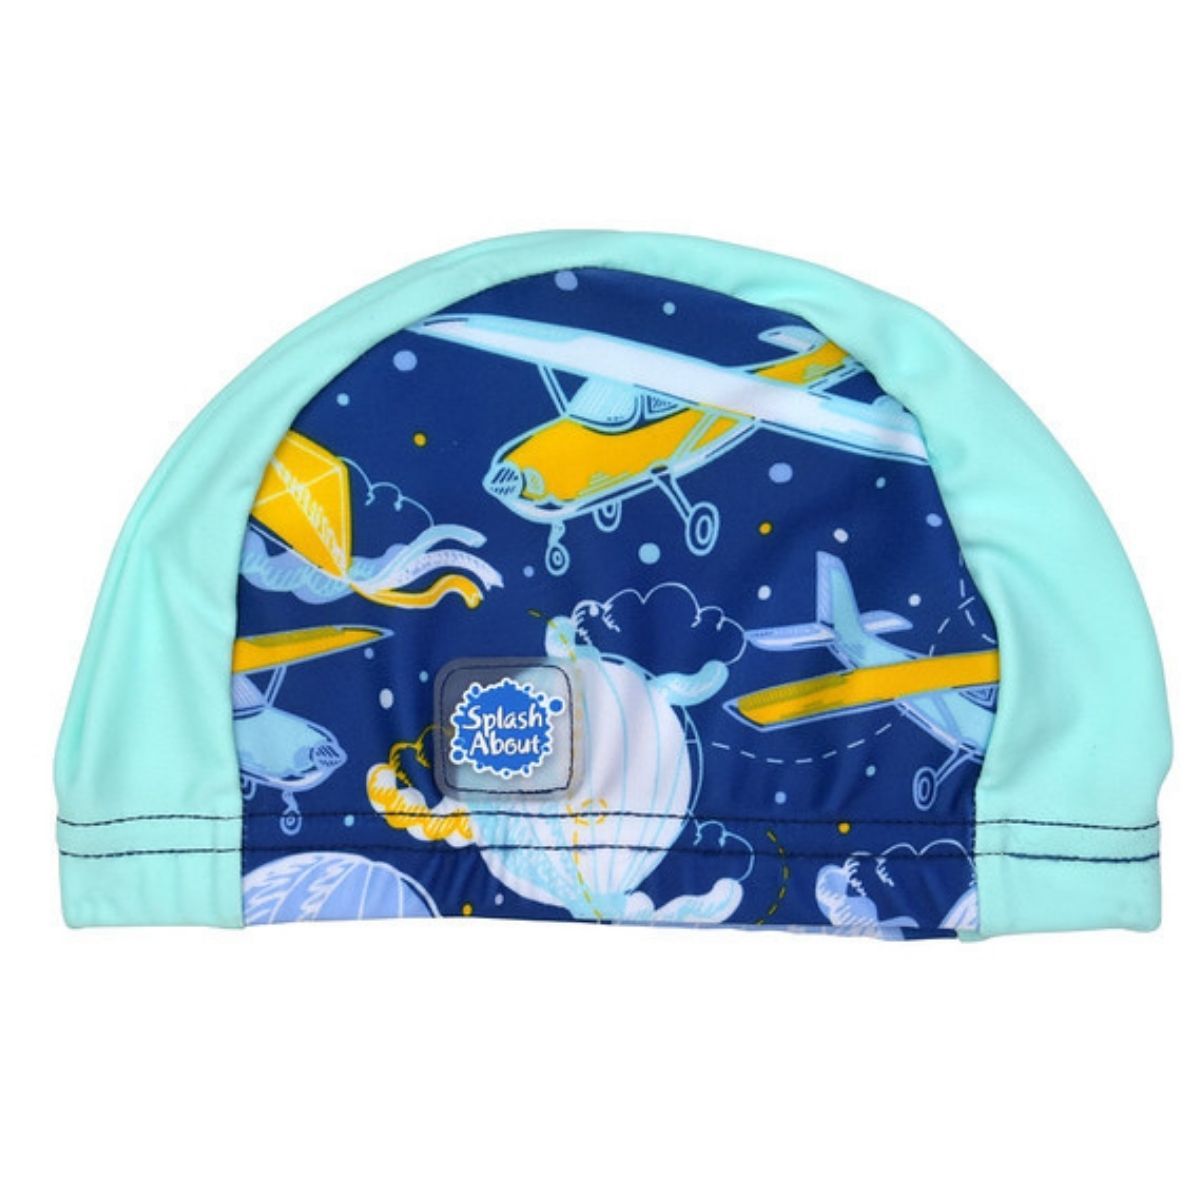 Cute baby swim hat in blue with light green trims and sky themed print, including airplanes, kites, clouds, hot air balloons and more.